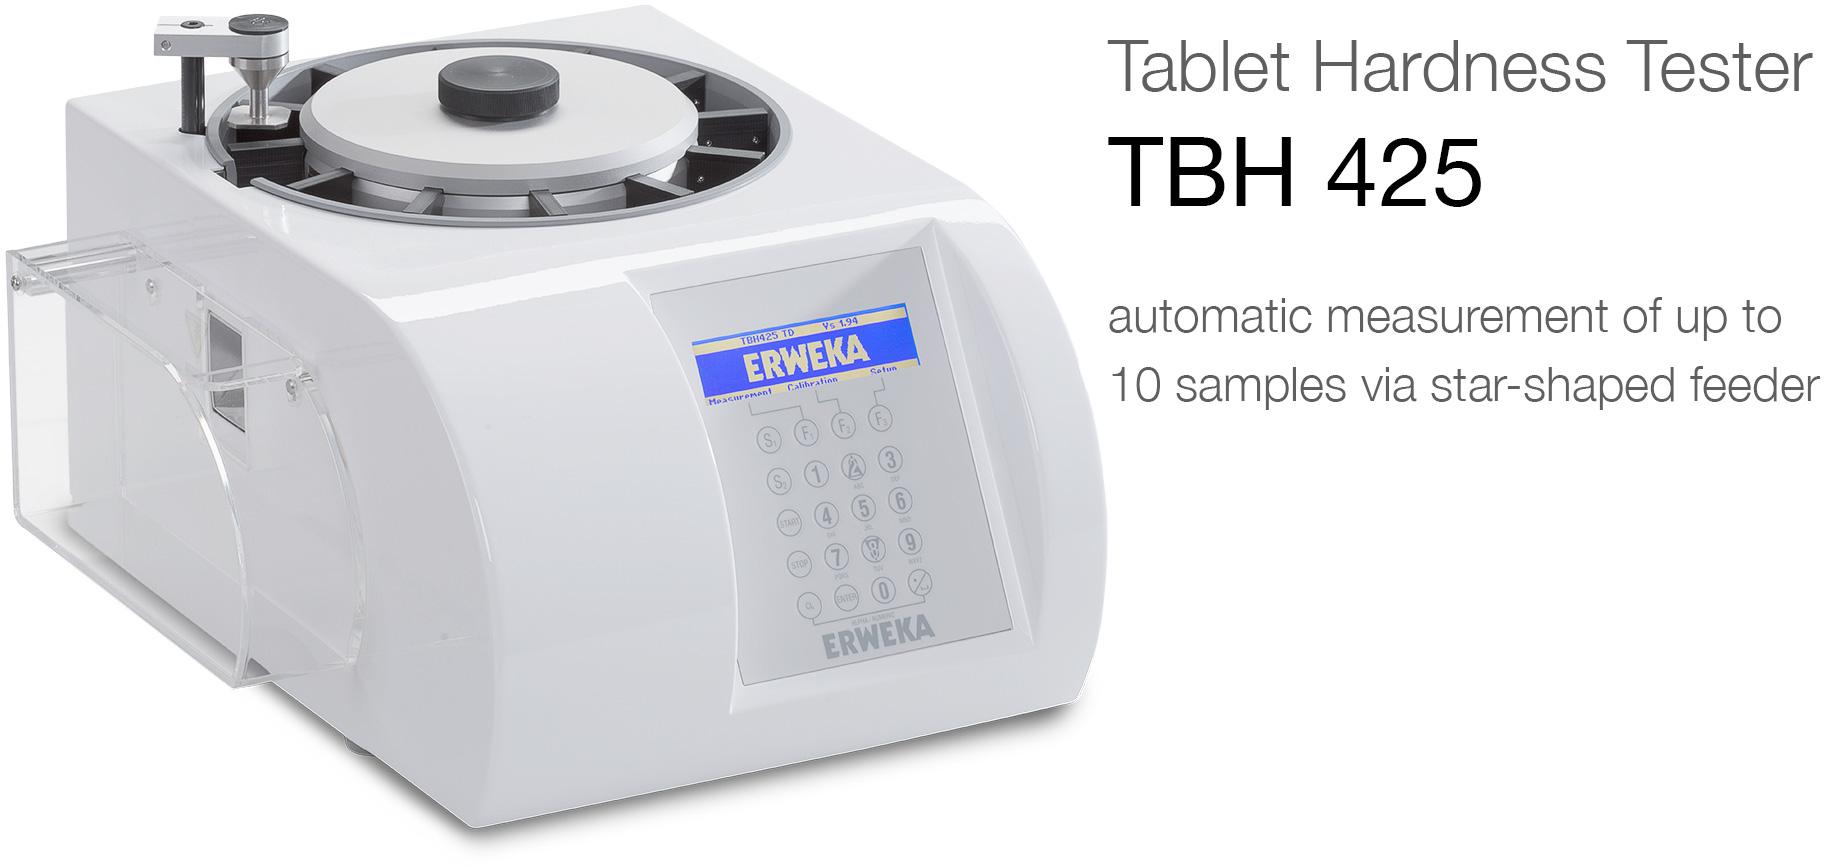 TBH 425 Tablet Hardness Testers